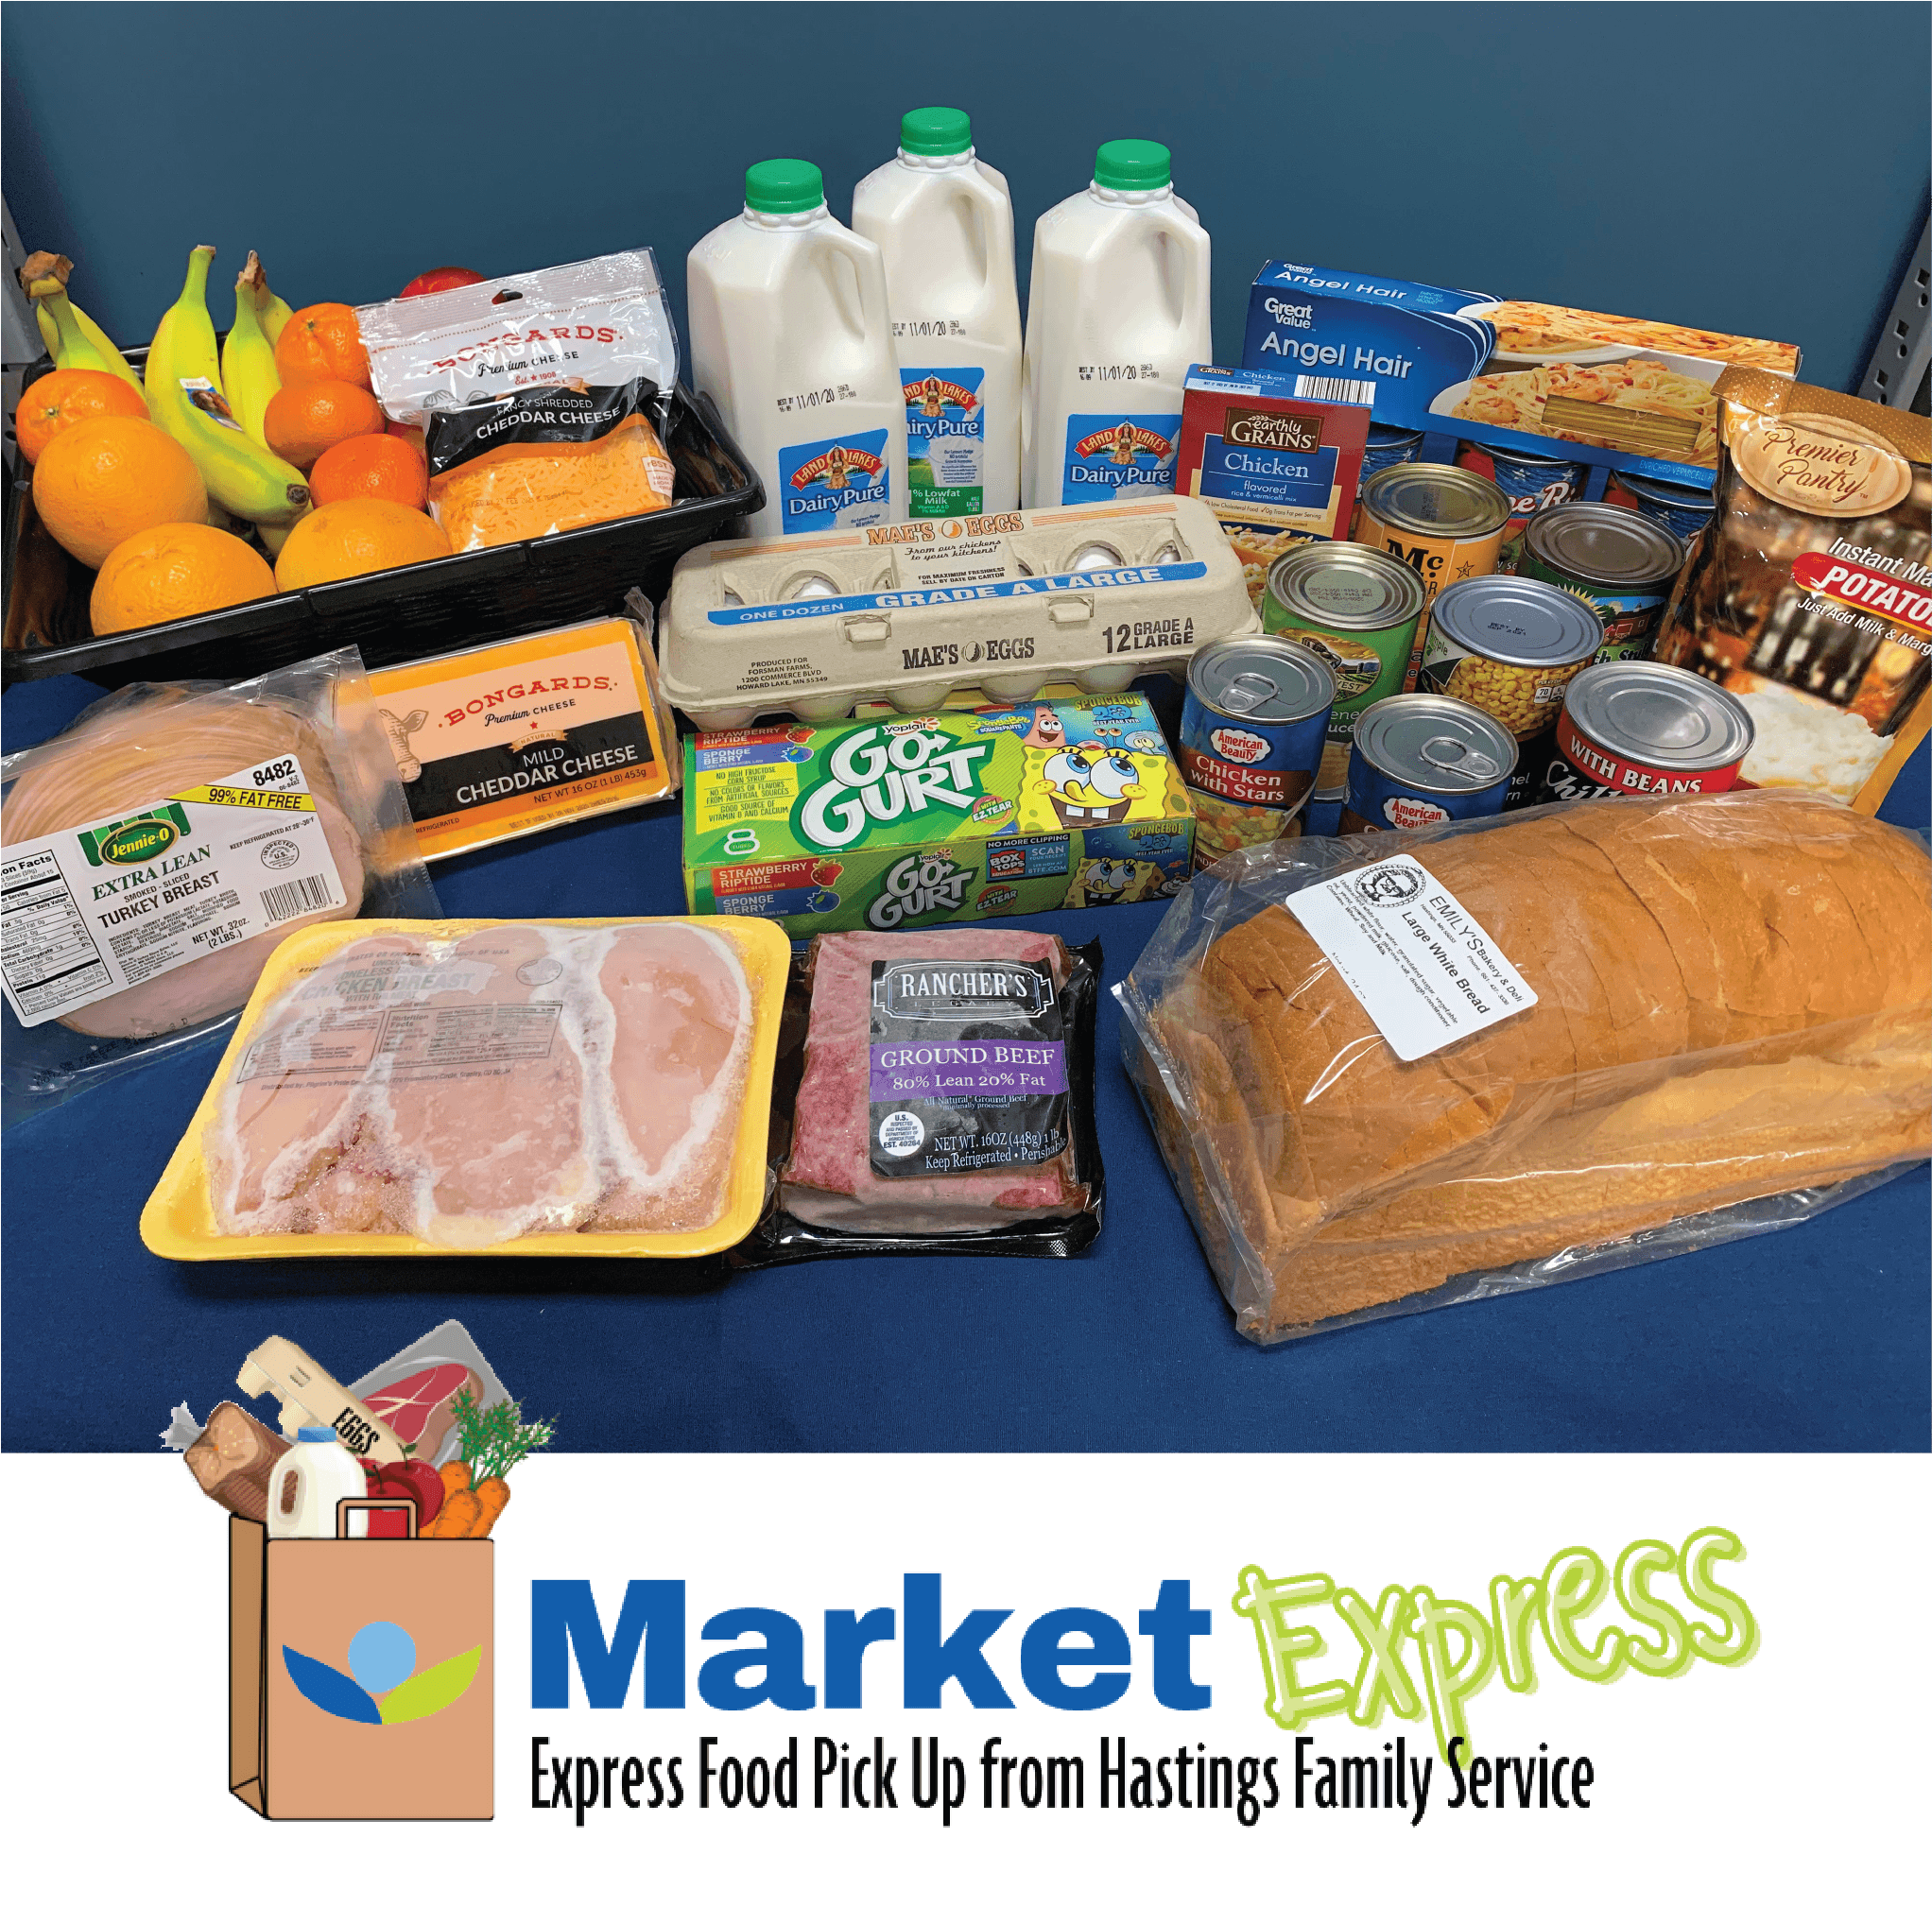 Frozen chicken, meats, bread, 1/2-gallon milks, fresh produce, and canned goods on a tabletop; logo Market Express.